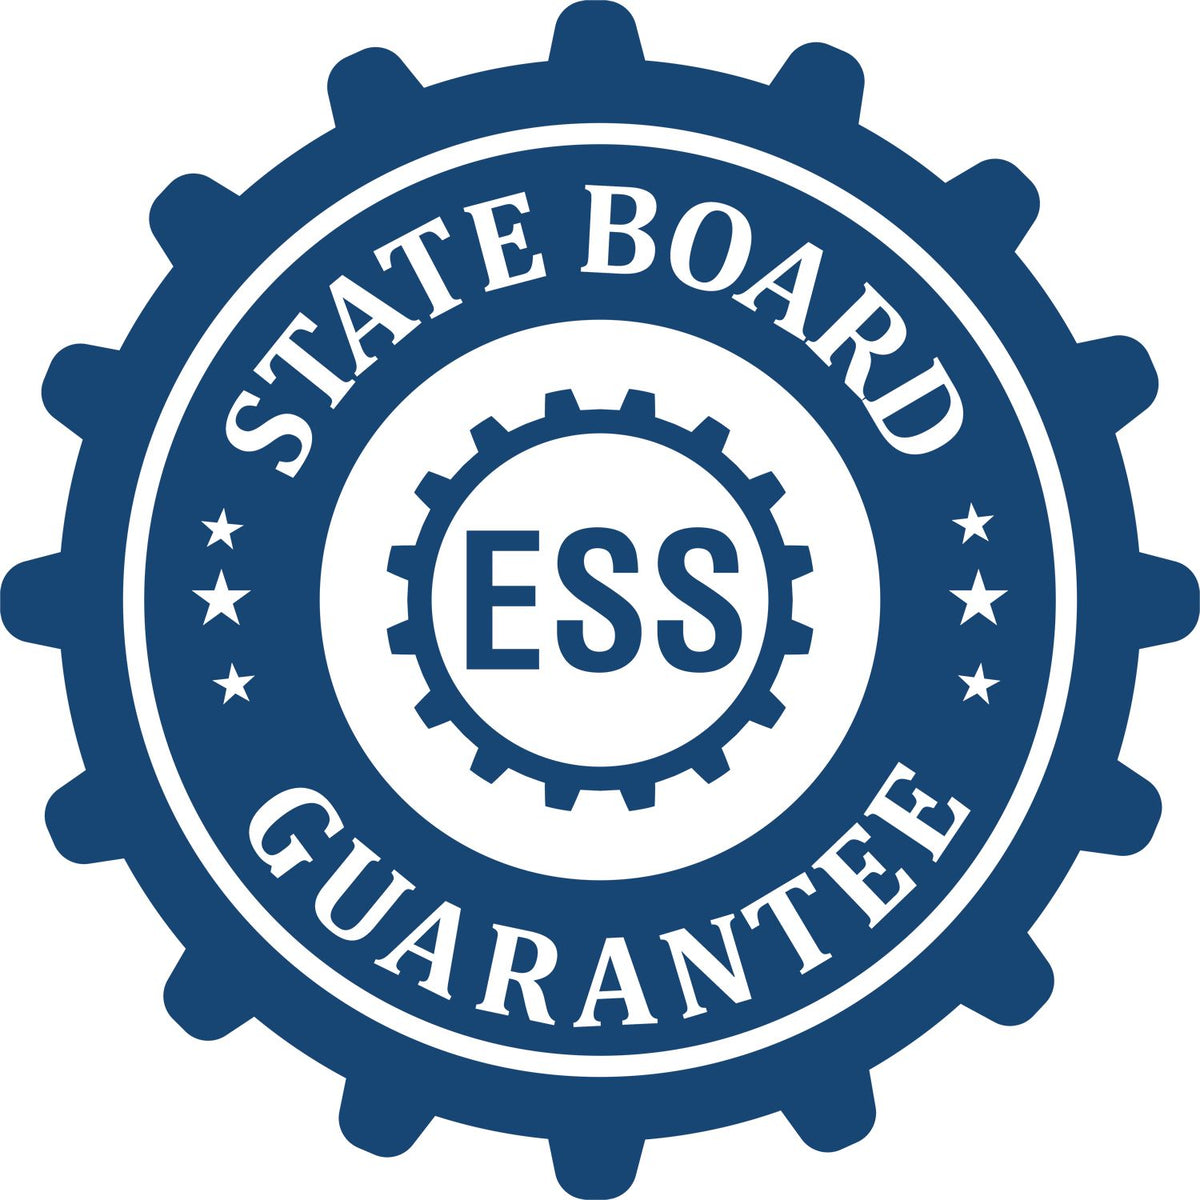 An emblem in a gear shape illustrating a state board guarantee for the Gift Washington Landscape Architect Seal